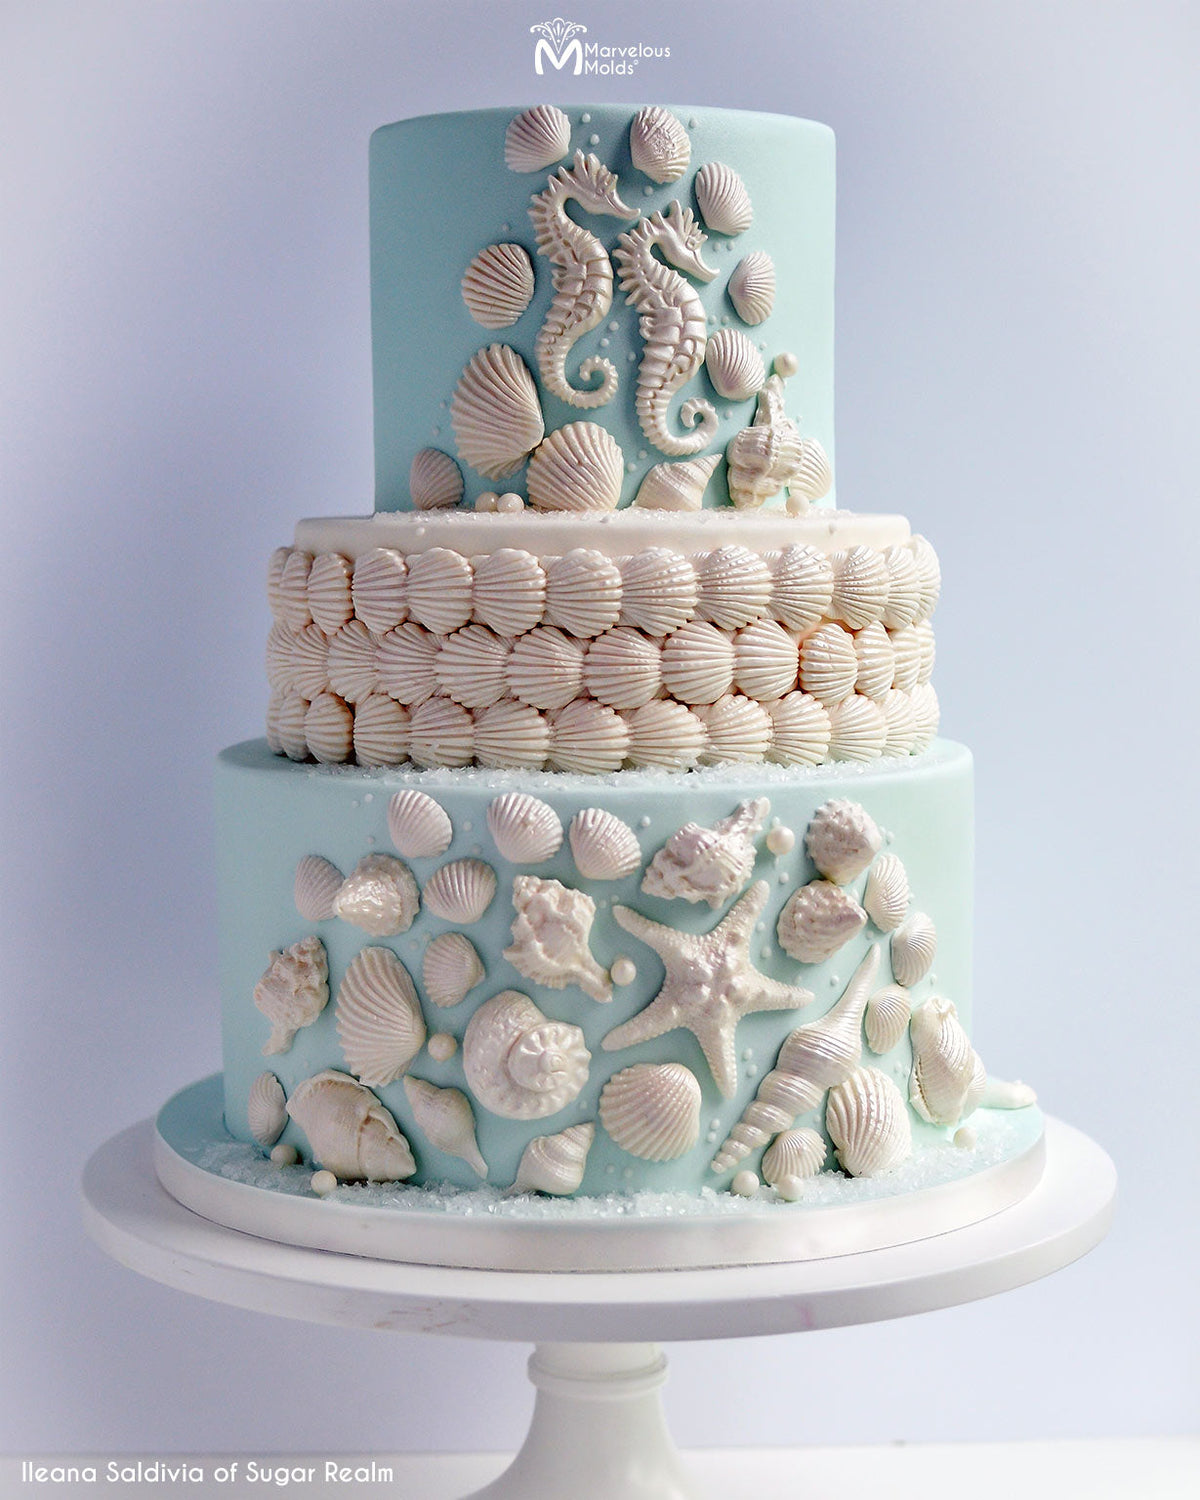 Seashell Beach Themed Wedding Cake Decorated with the Marvelous Molds Medium Cockle Shells Silicone Mold